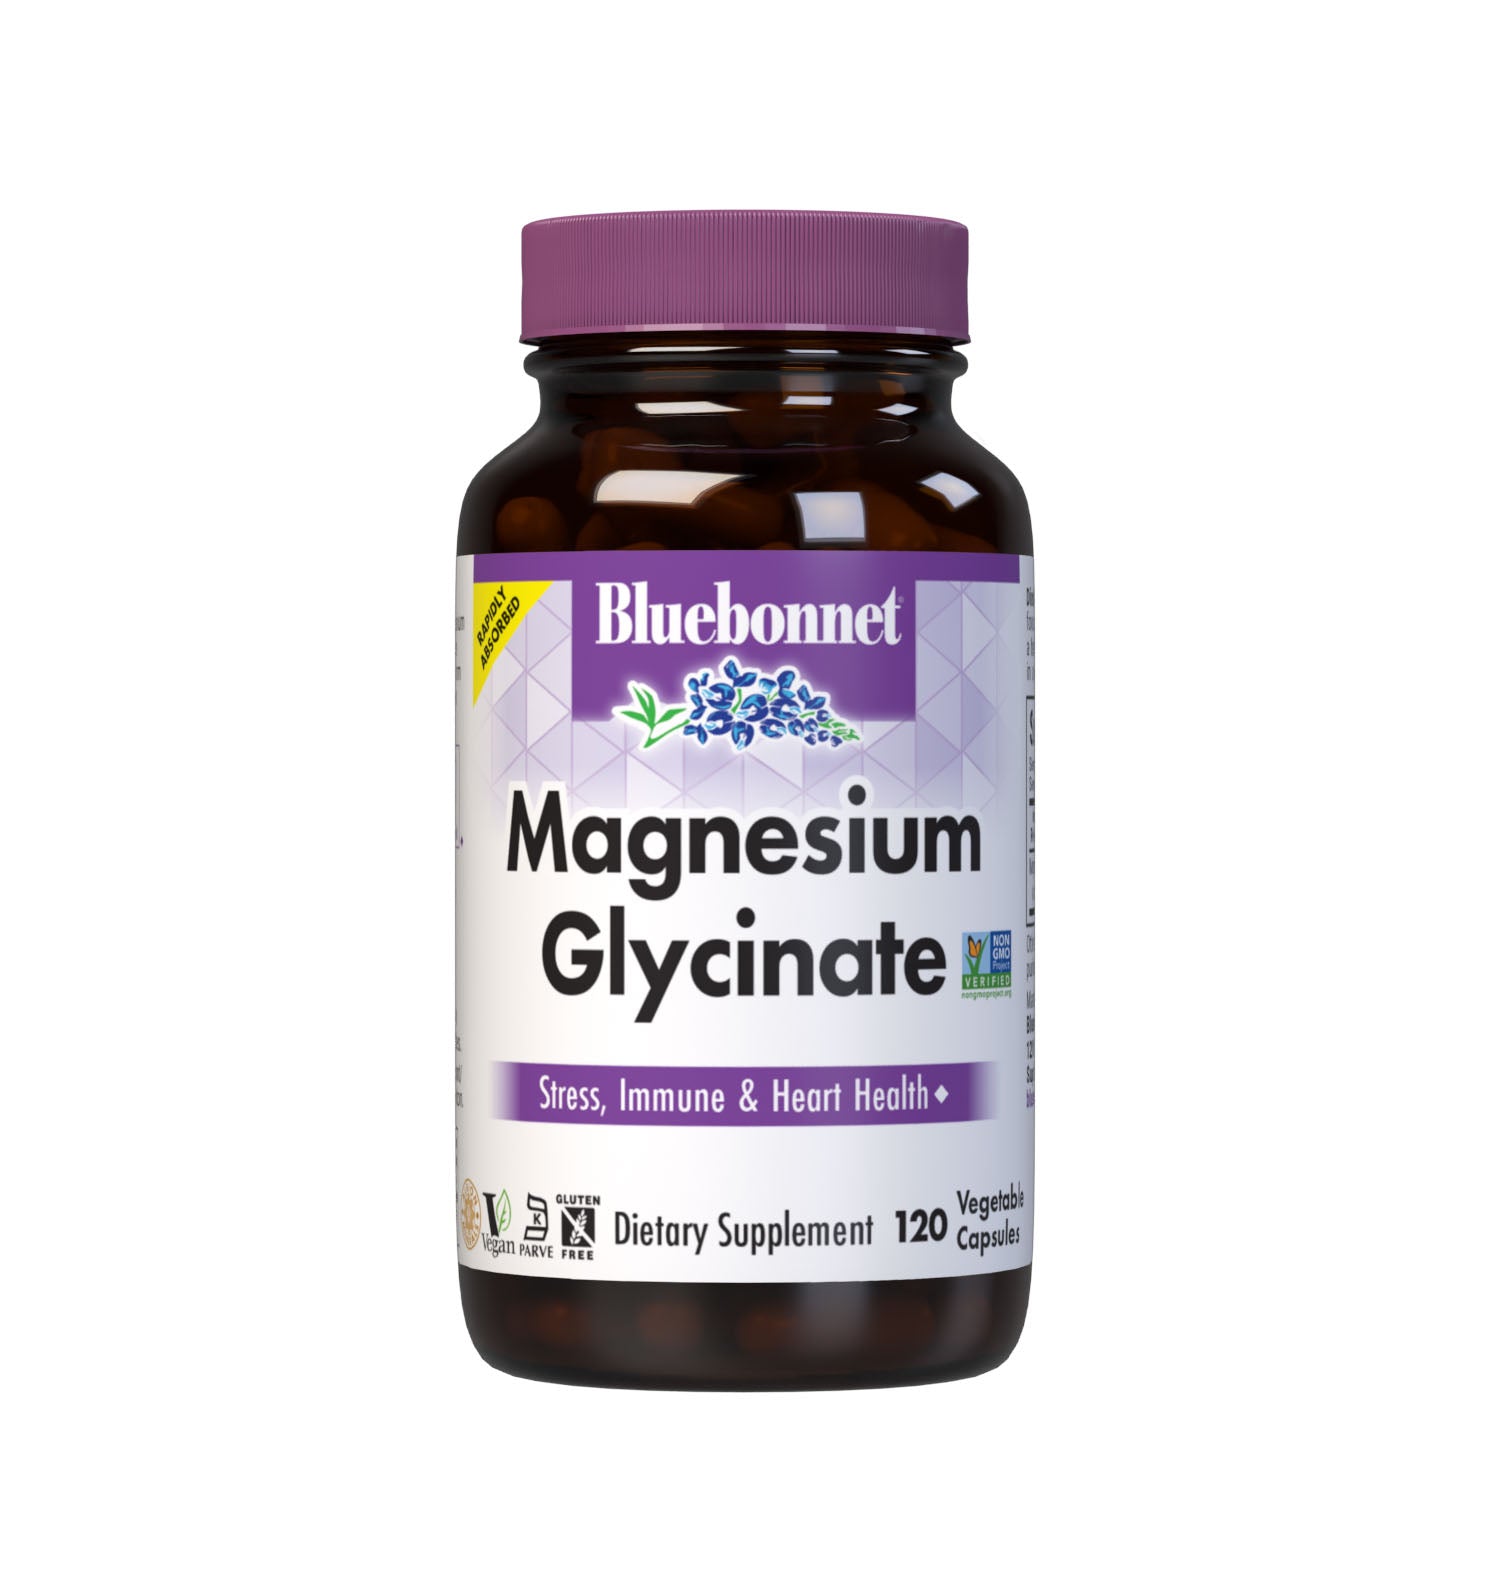 Bluebonnet’s Magnesium Glycinate 120 Vegetable Capsules are formulated with 400 mg per serving of elemental magnesium from fully reacted magnesium glycinate, a more rapidly absorbed amino acid mineral complex from Albion. Magnesium supports energy production and is critical for enzyme function. Available in easy-to-swallow vegetable capsules for maximum assimilation and absorption. #size_120 count